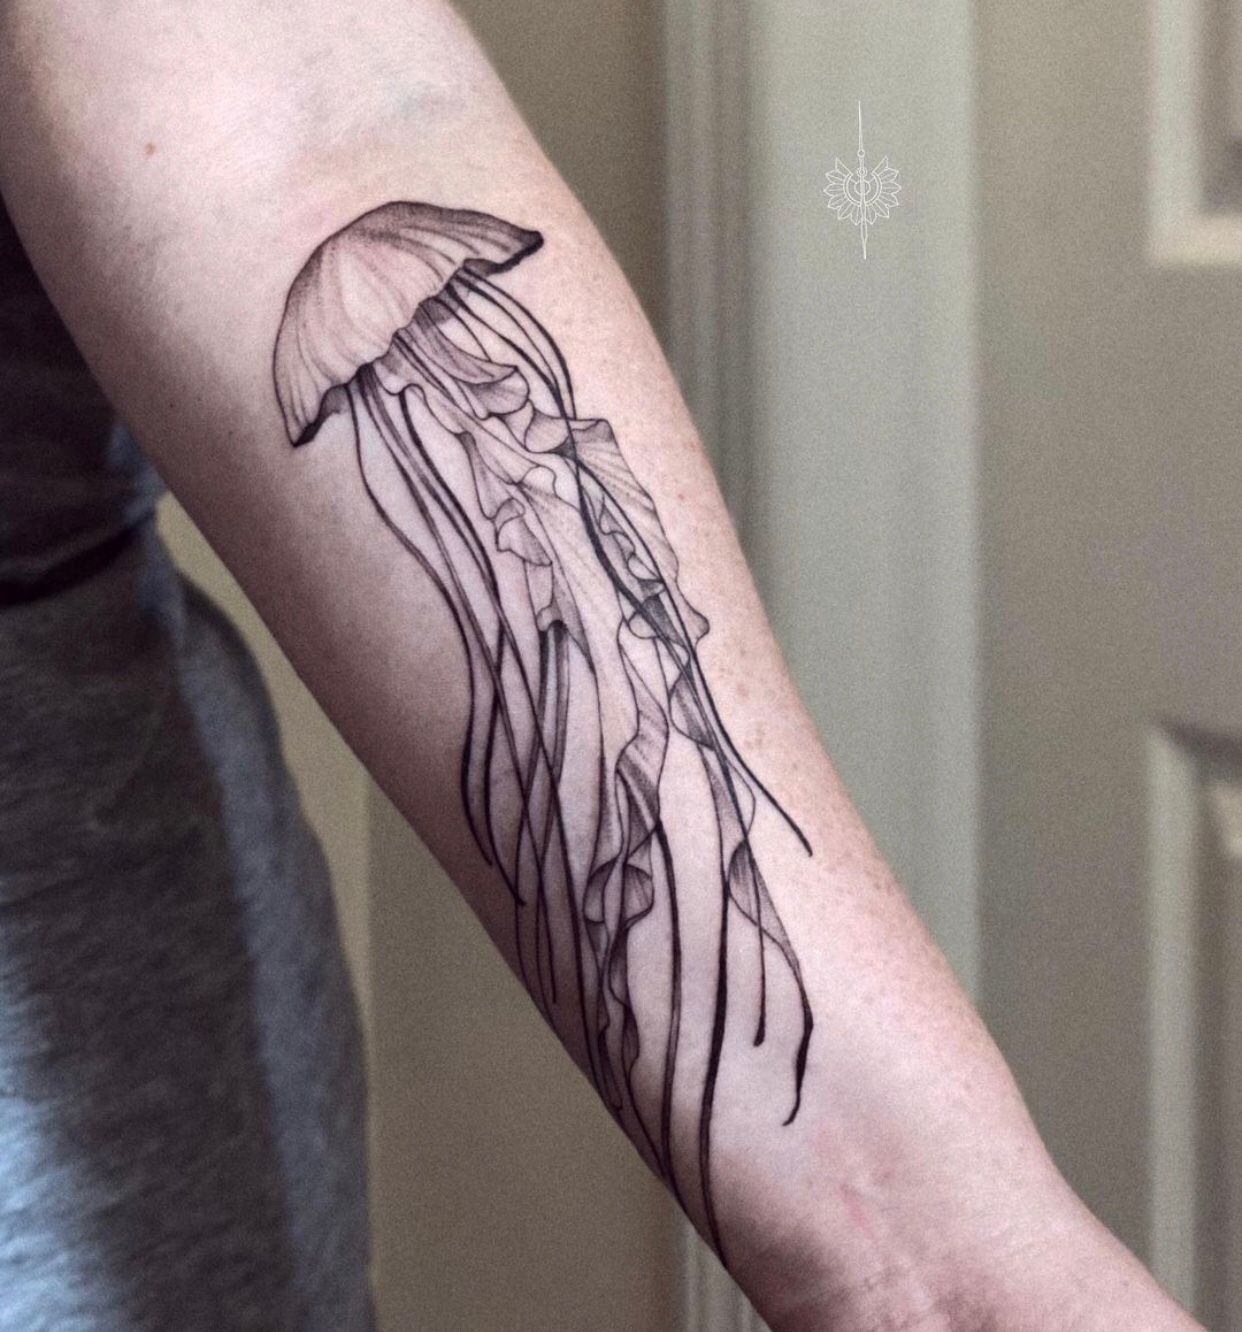 Discover 140+ simple jellyfish tattoo